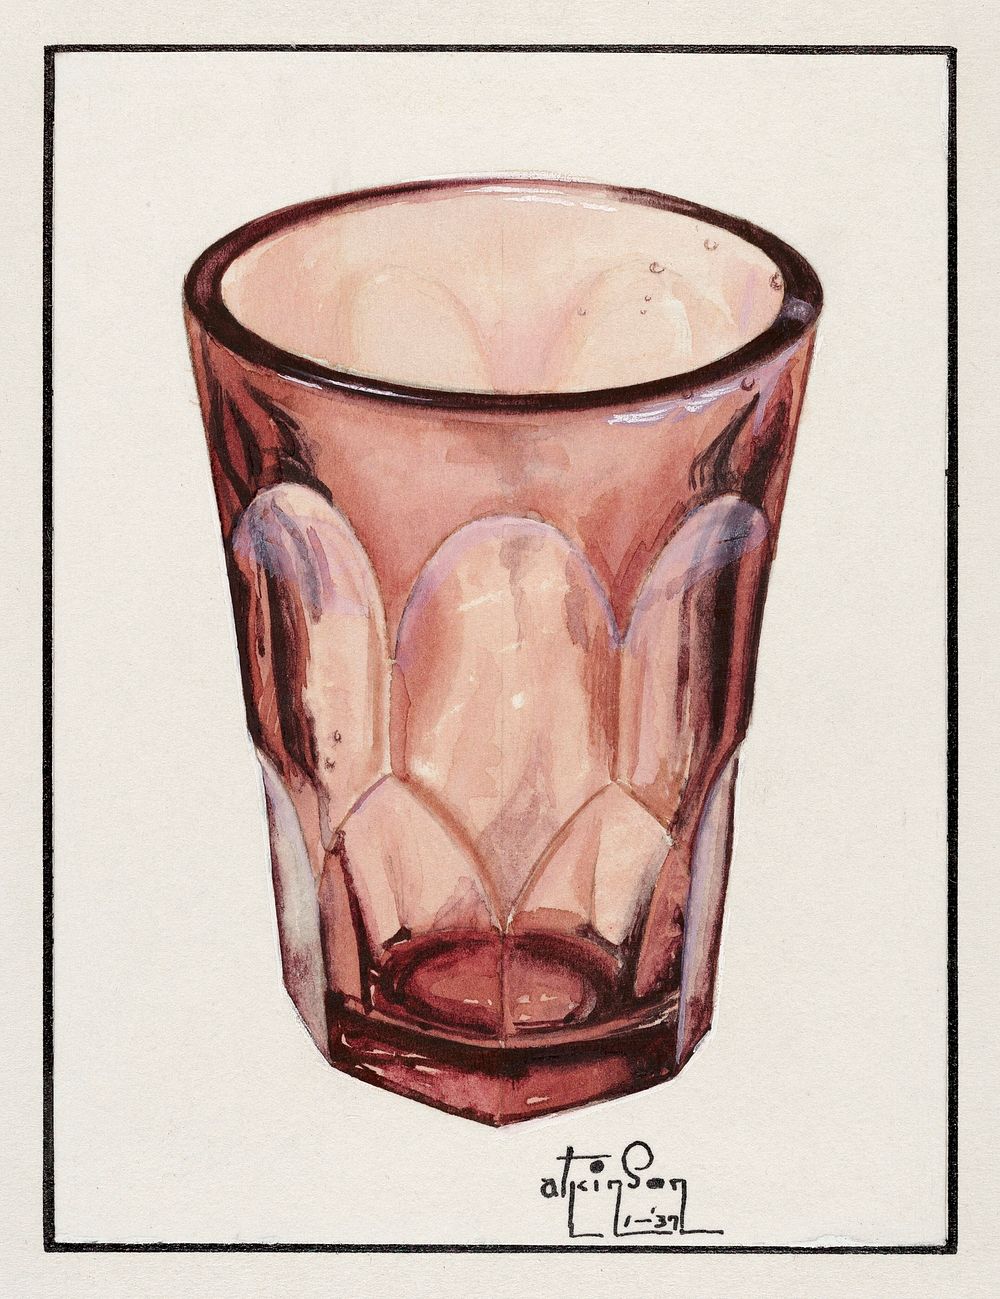 Whiskey Glass (ca.1937) by Ralph Atkinson. Original from The National Gallery of Art. Digitally enhanced by rawpixel.